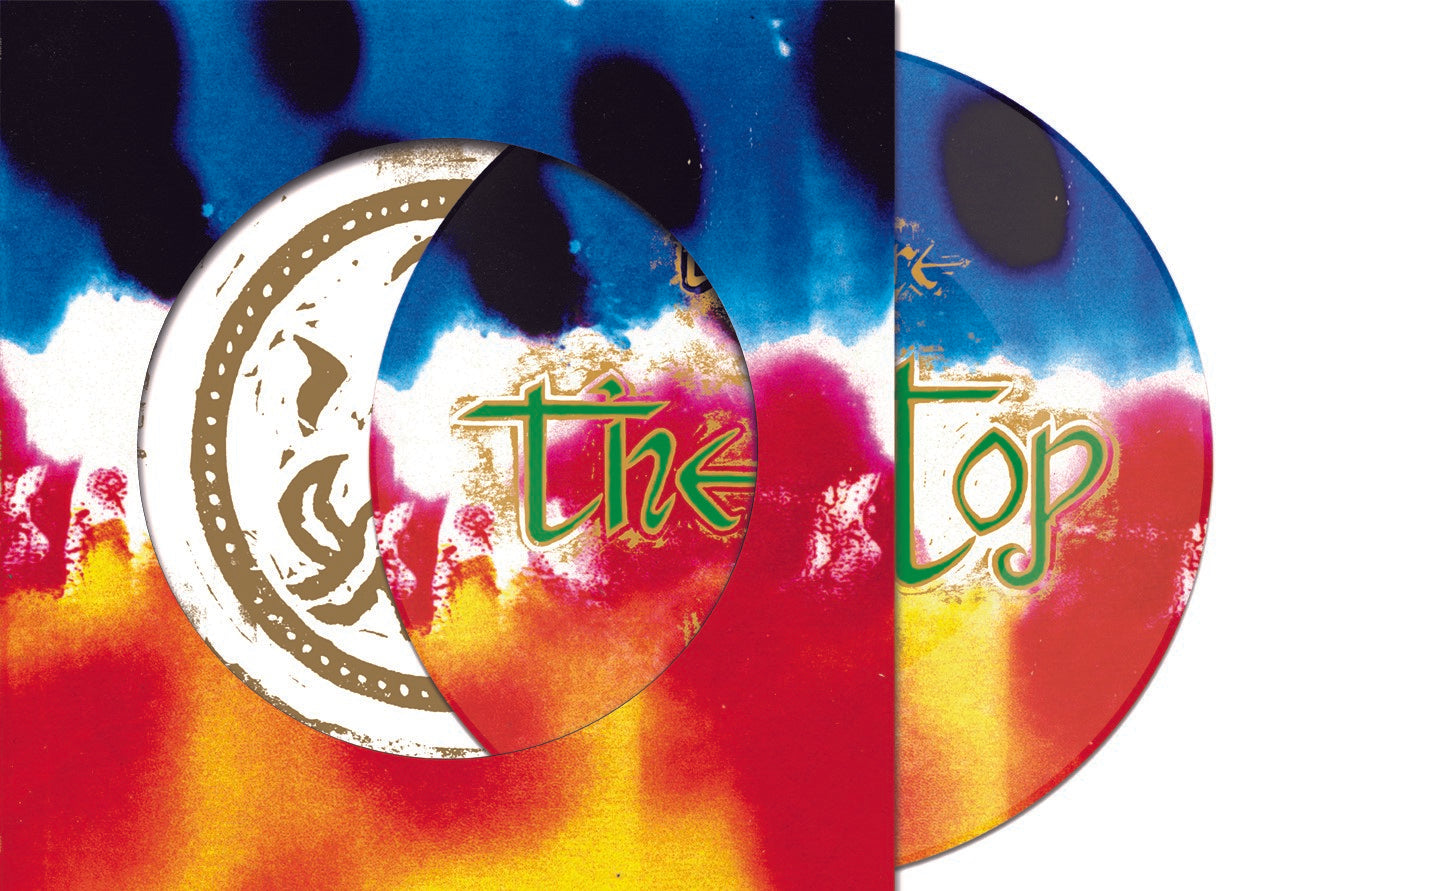 THE CURE - The Top - 40th Anniversary Picture Disc - 1 LP - Picture Disc  [RSD 2024]